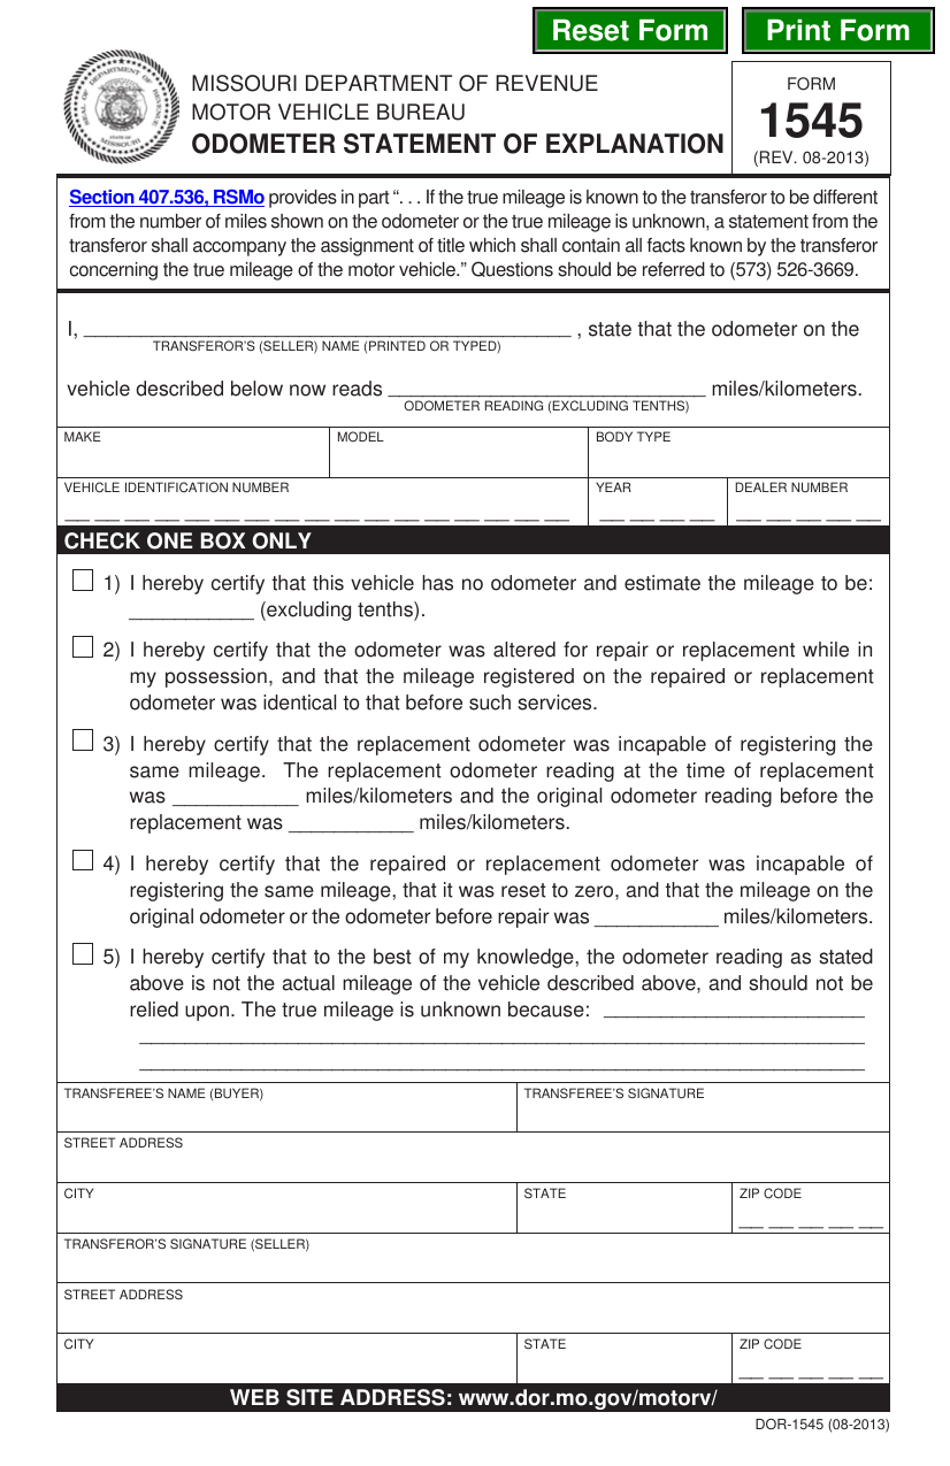 Form 1545 Odometer Statement of Explanation - Missouri, Page 1